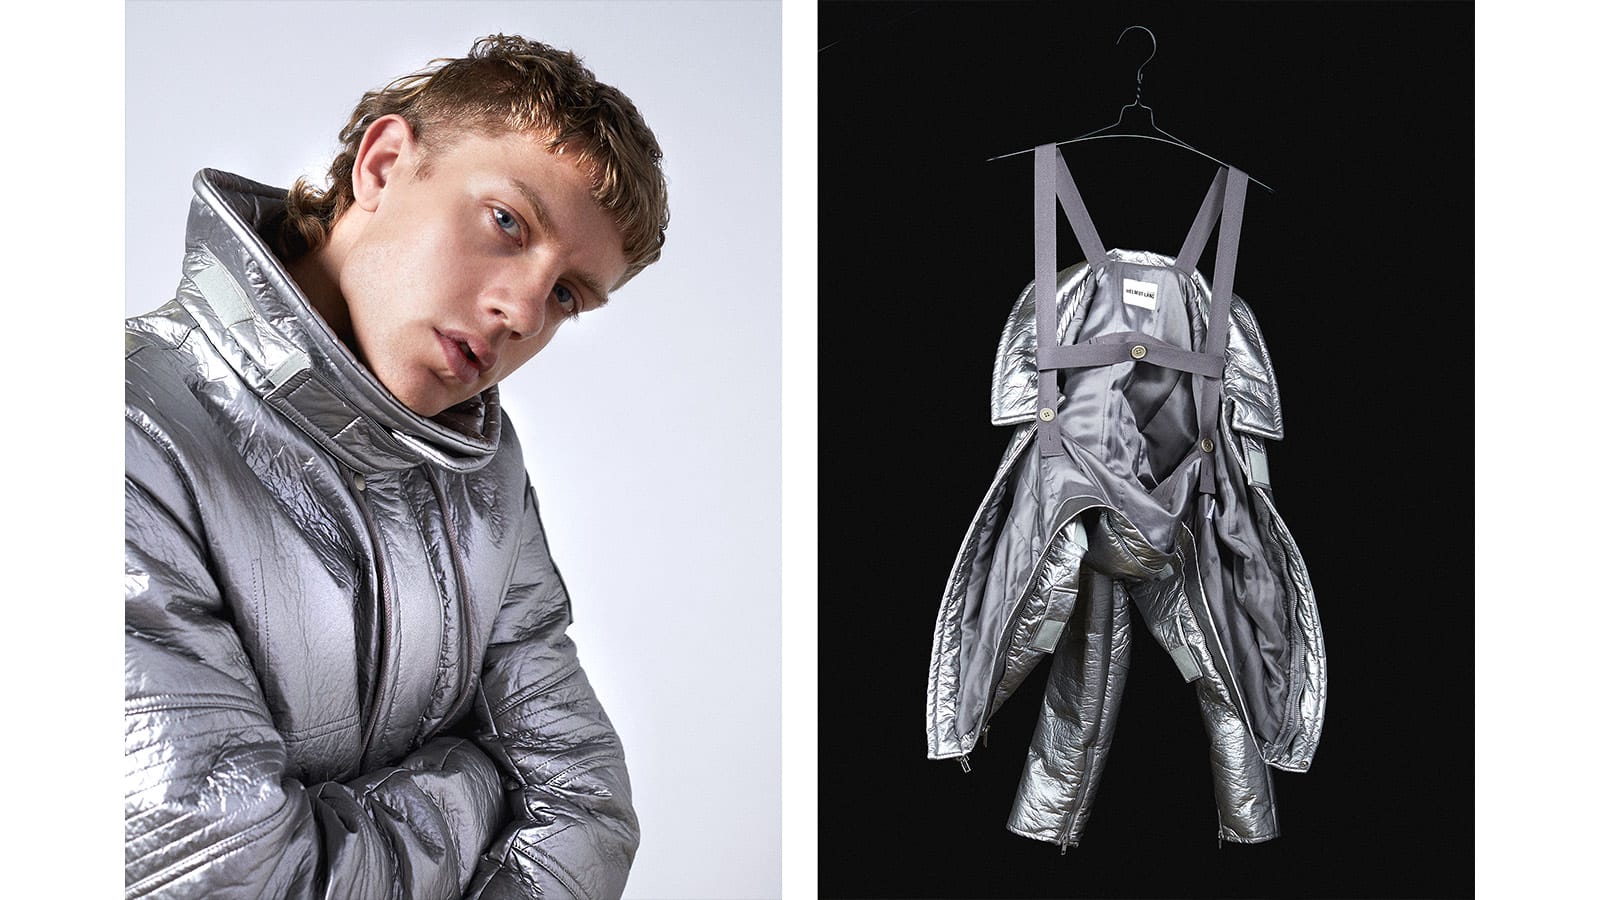 Helmut Lang Re-Editions Capsule Collection - Now Online | END.